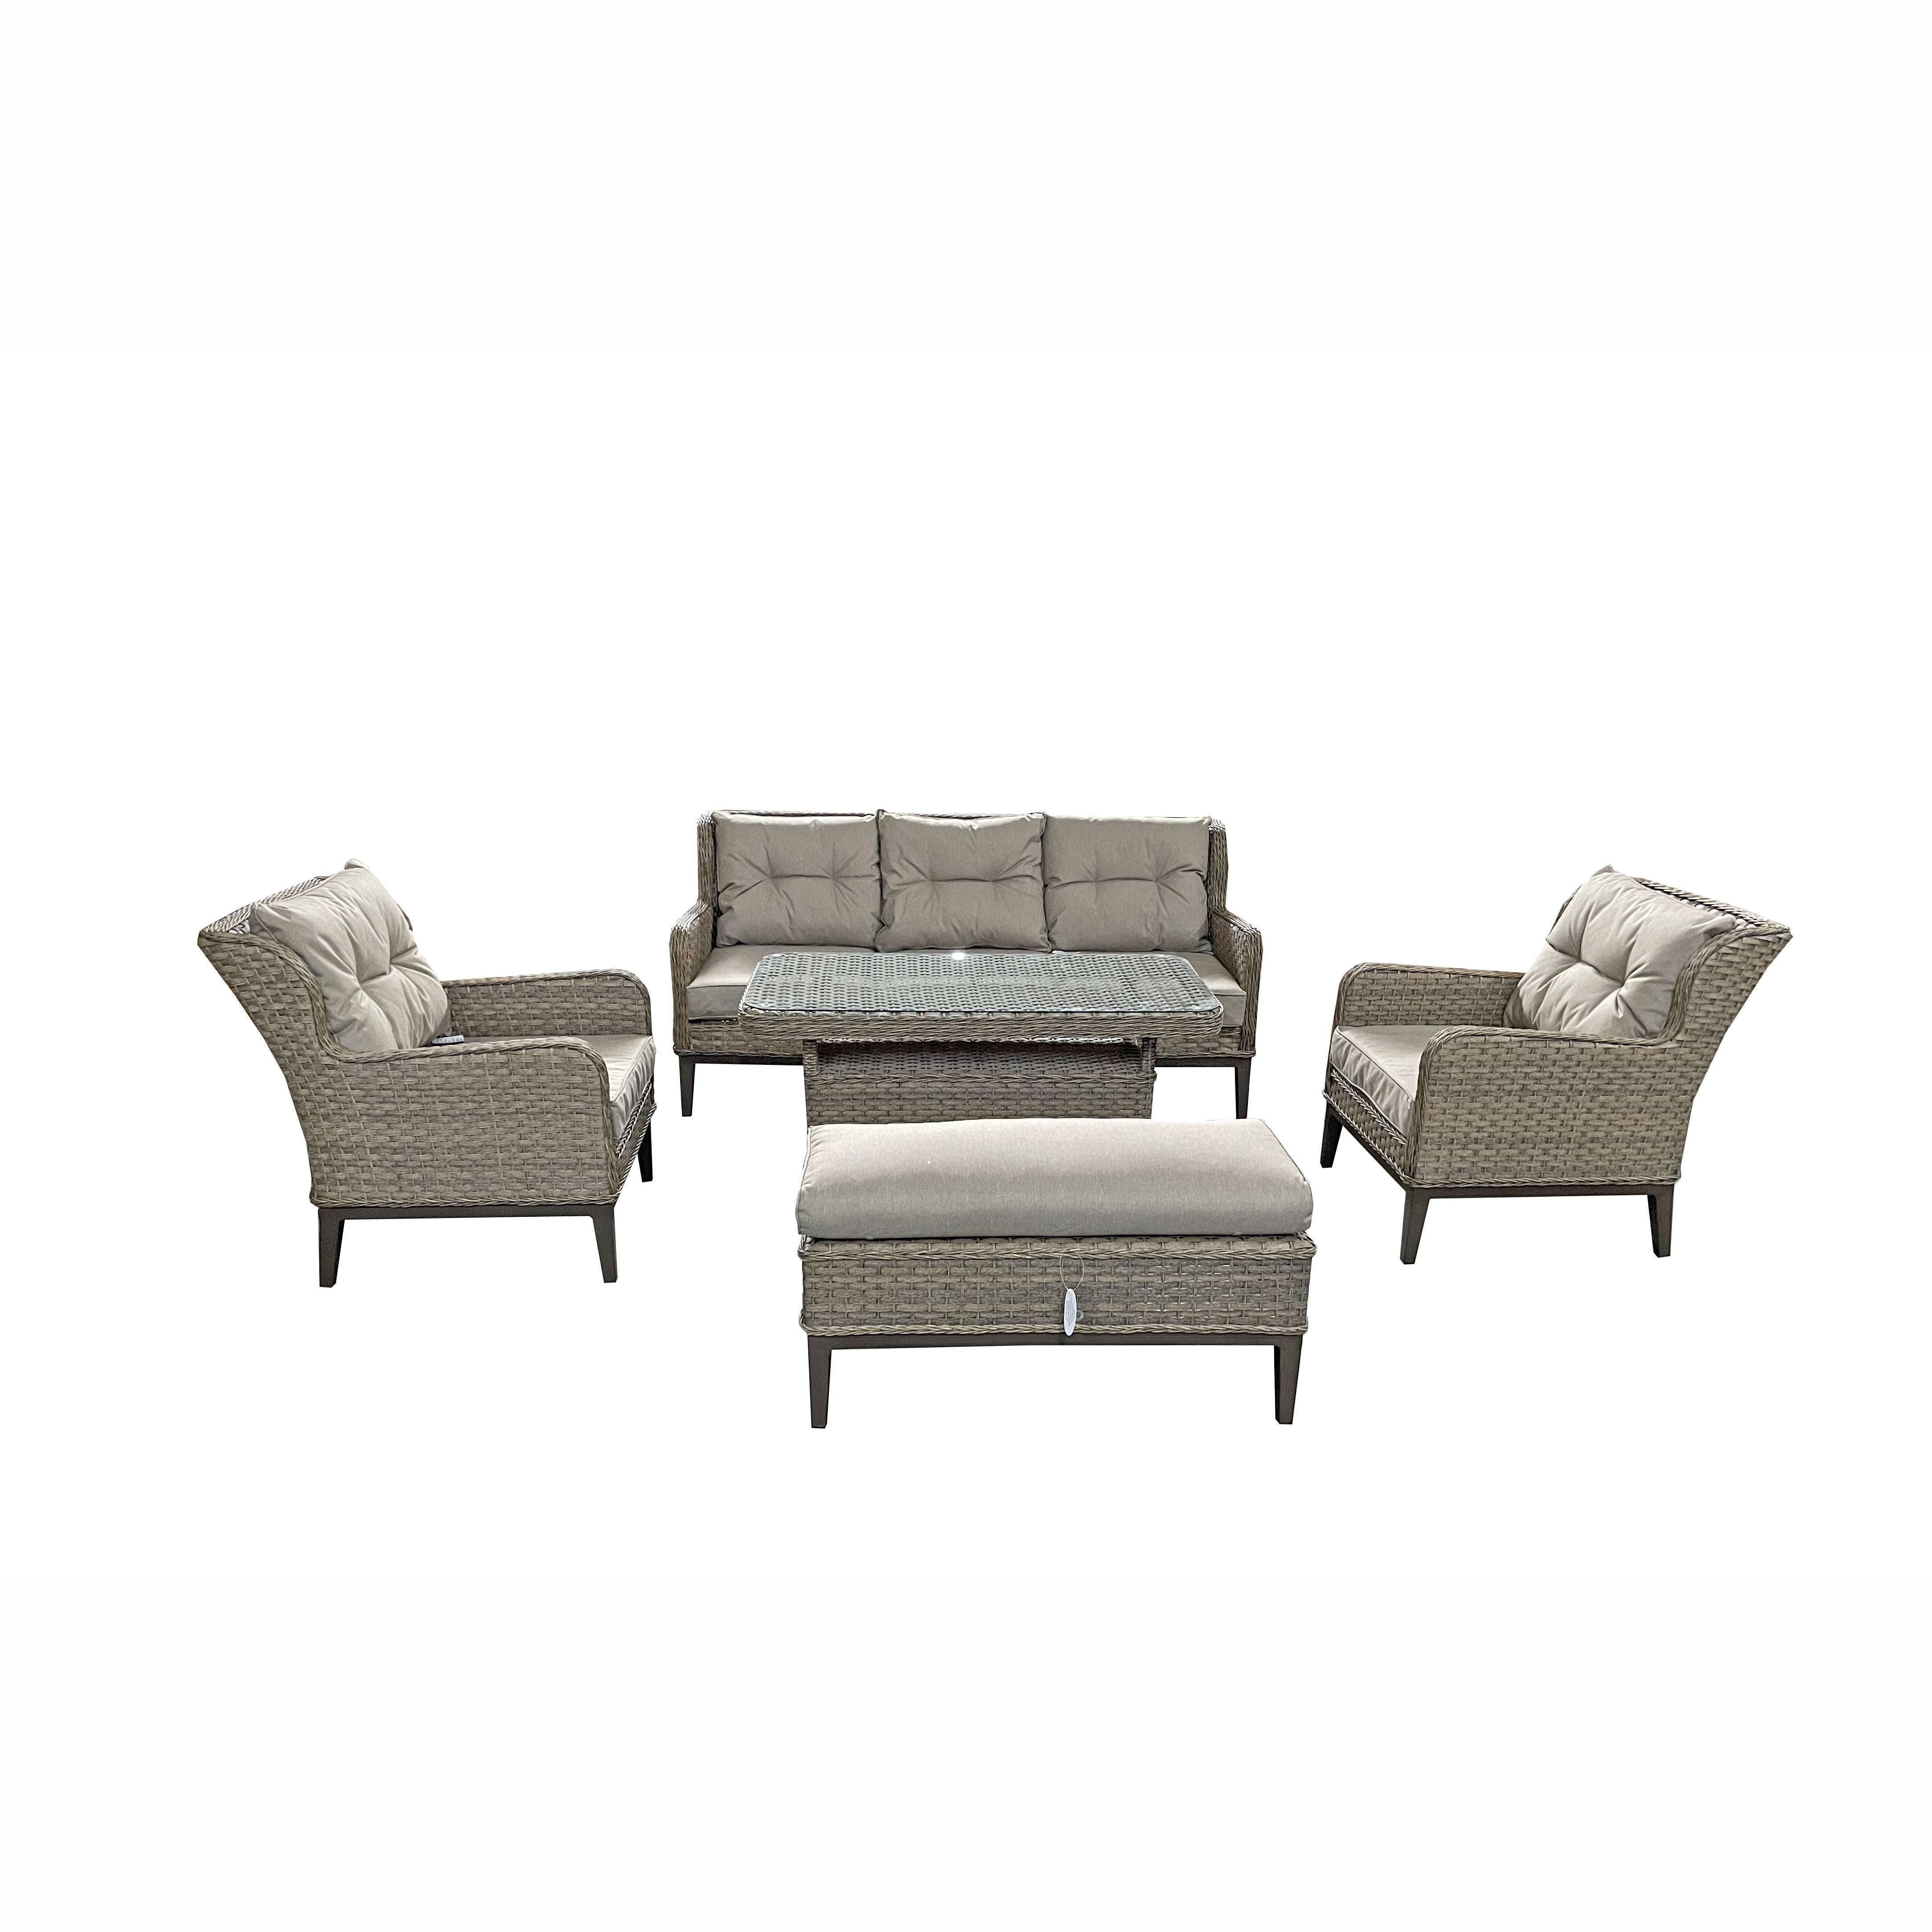 Exceptional Garden:Signature Weave Diana Sofa Set with Dining Table